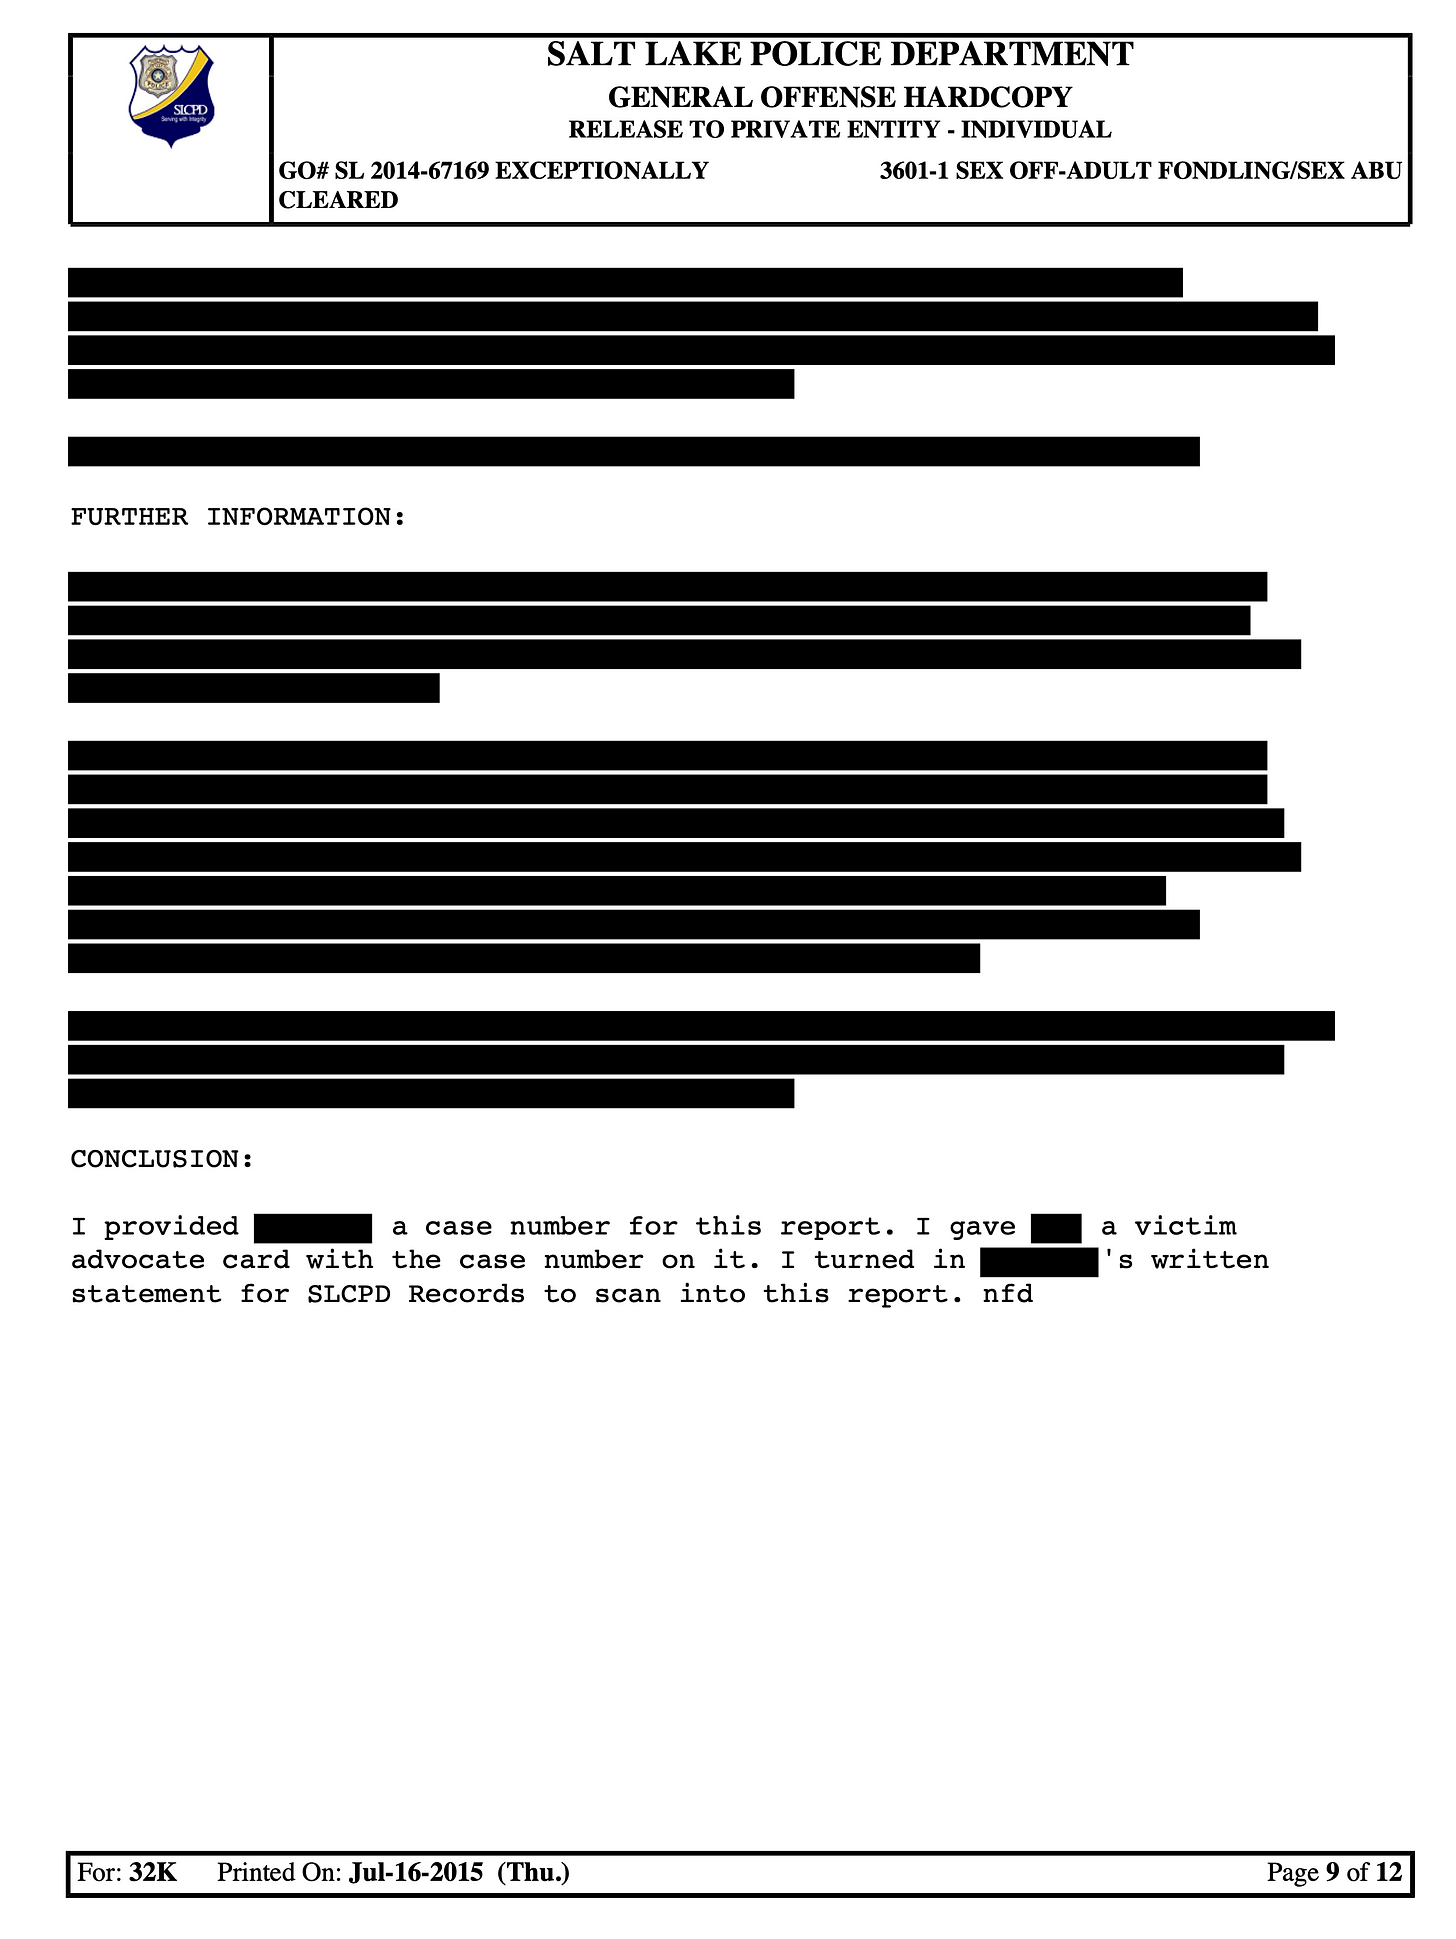 further information: all redacted